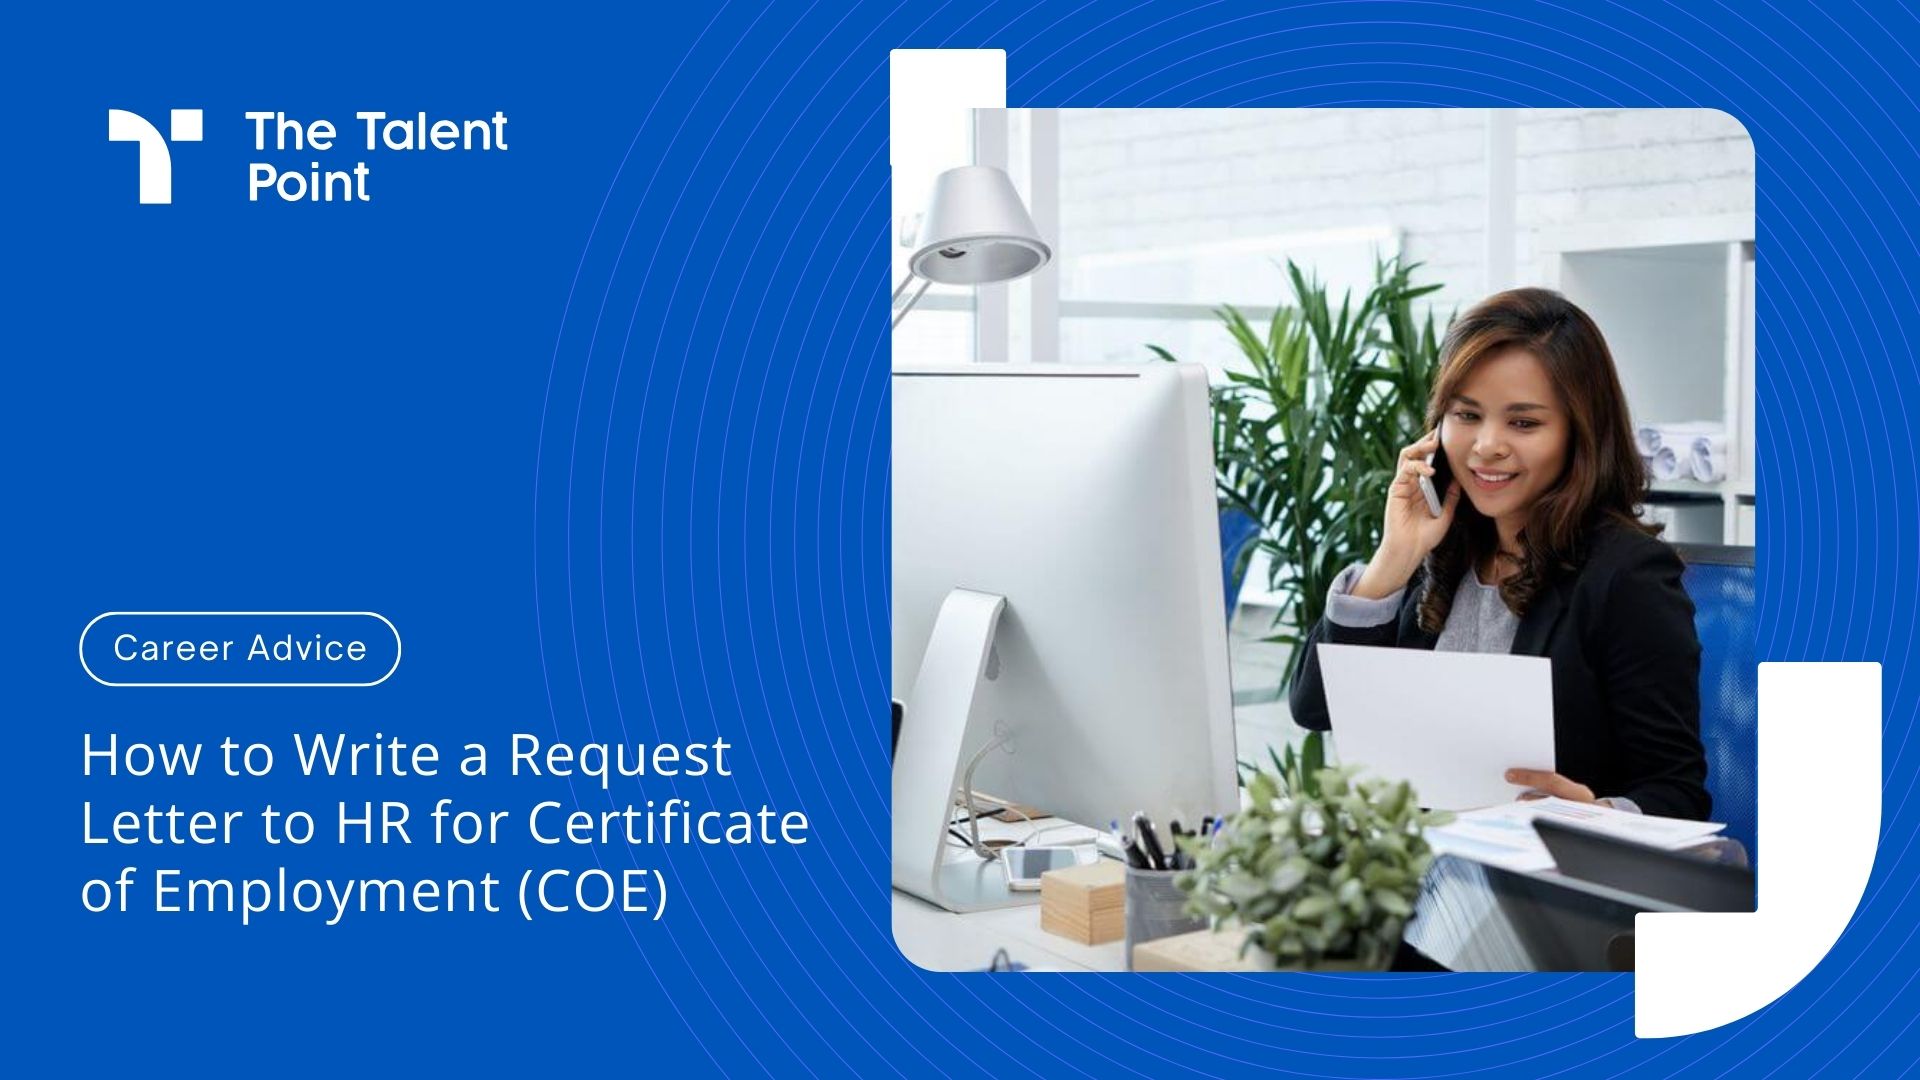 How to Write Request Letter to HR for Certificate of Employment (COE) to HR : - TalentPoint